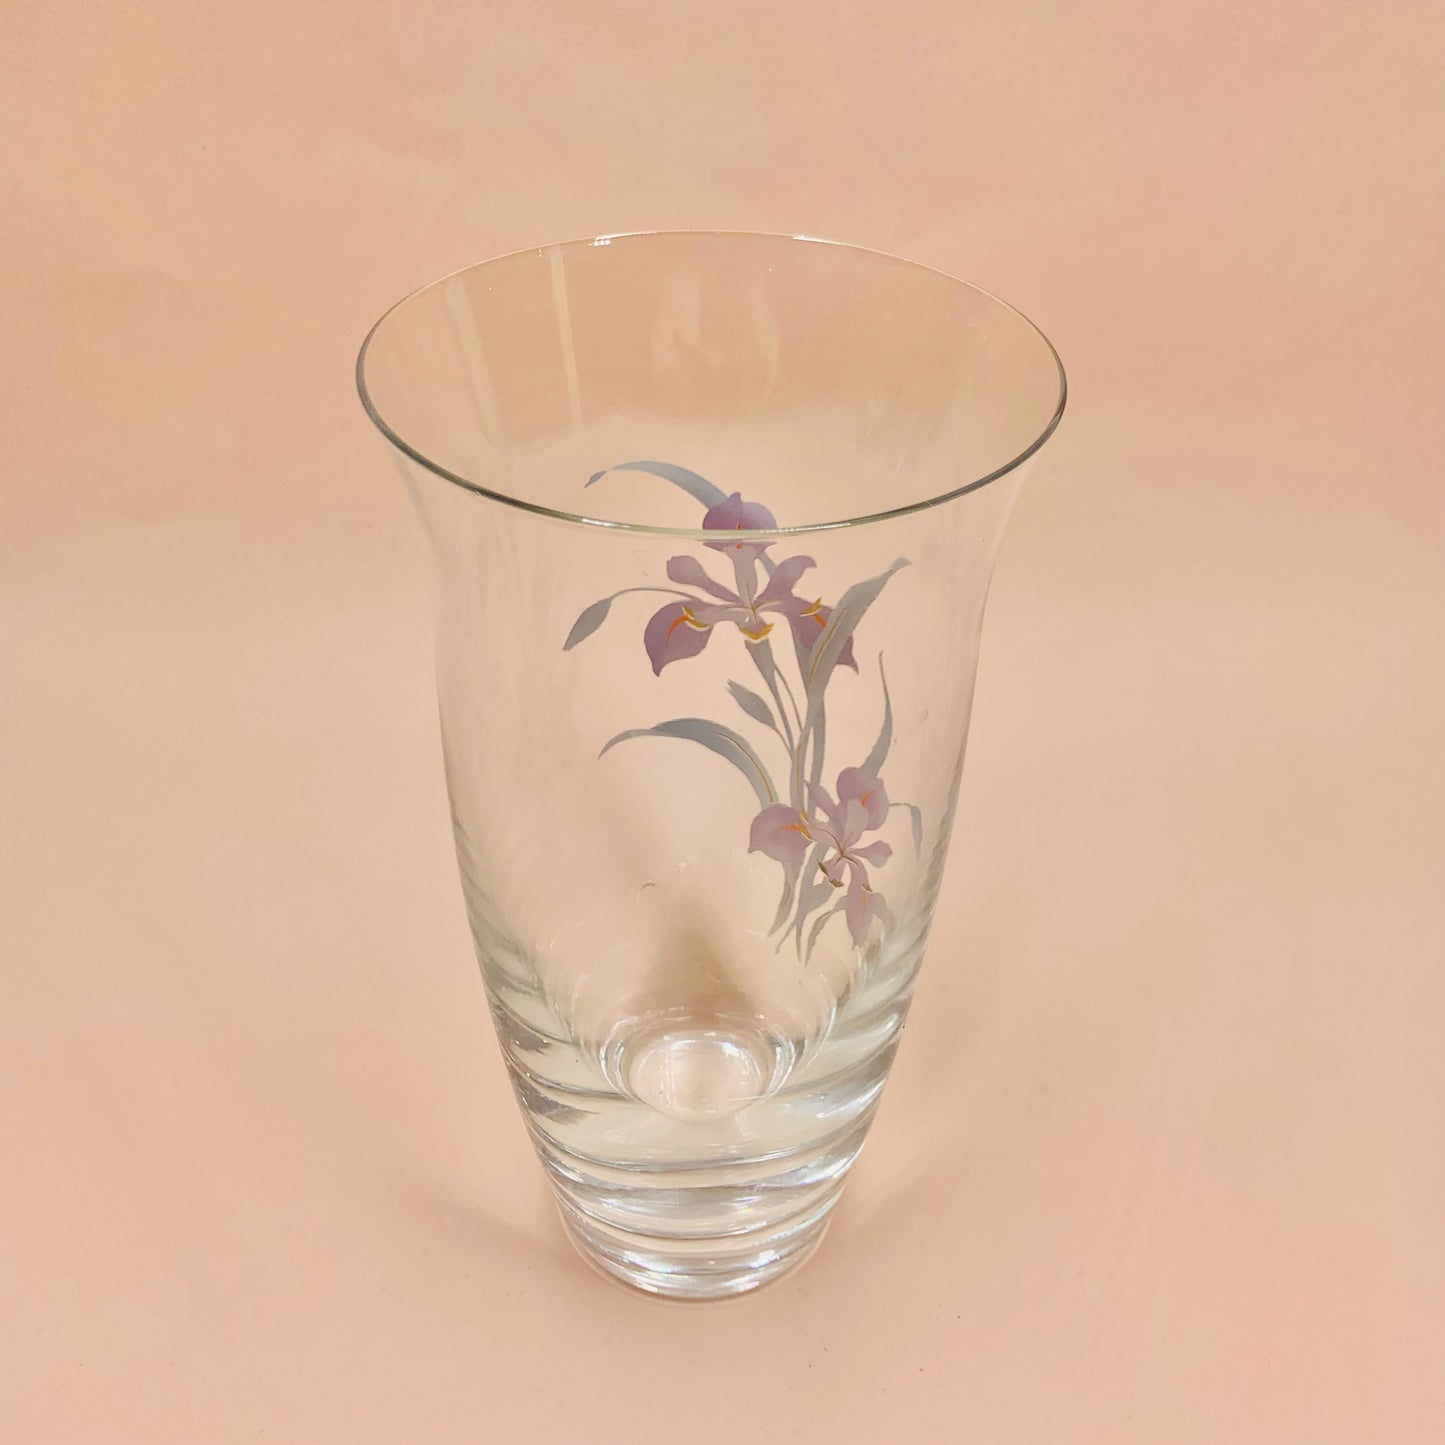 1980s glass vase with laminated floral decoration